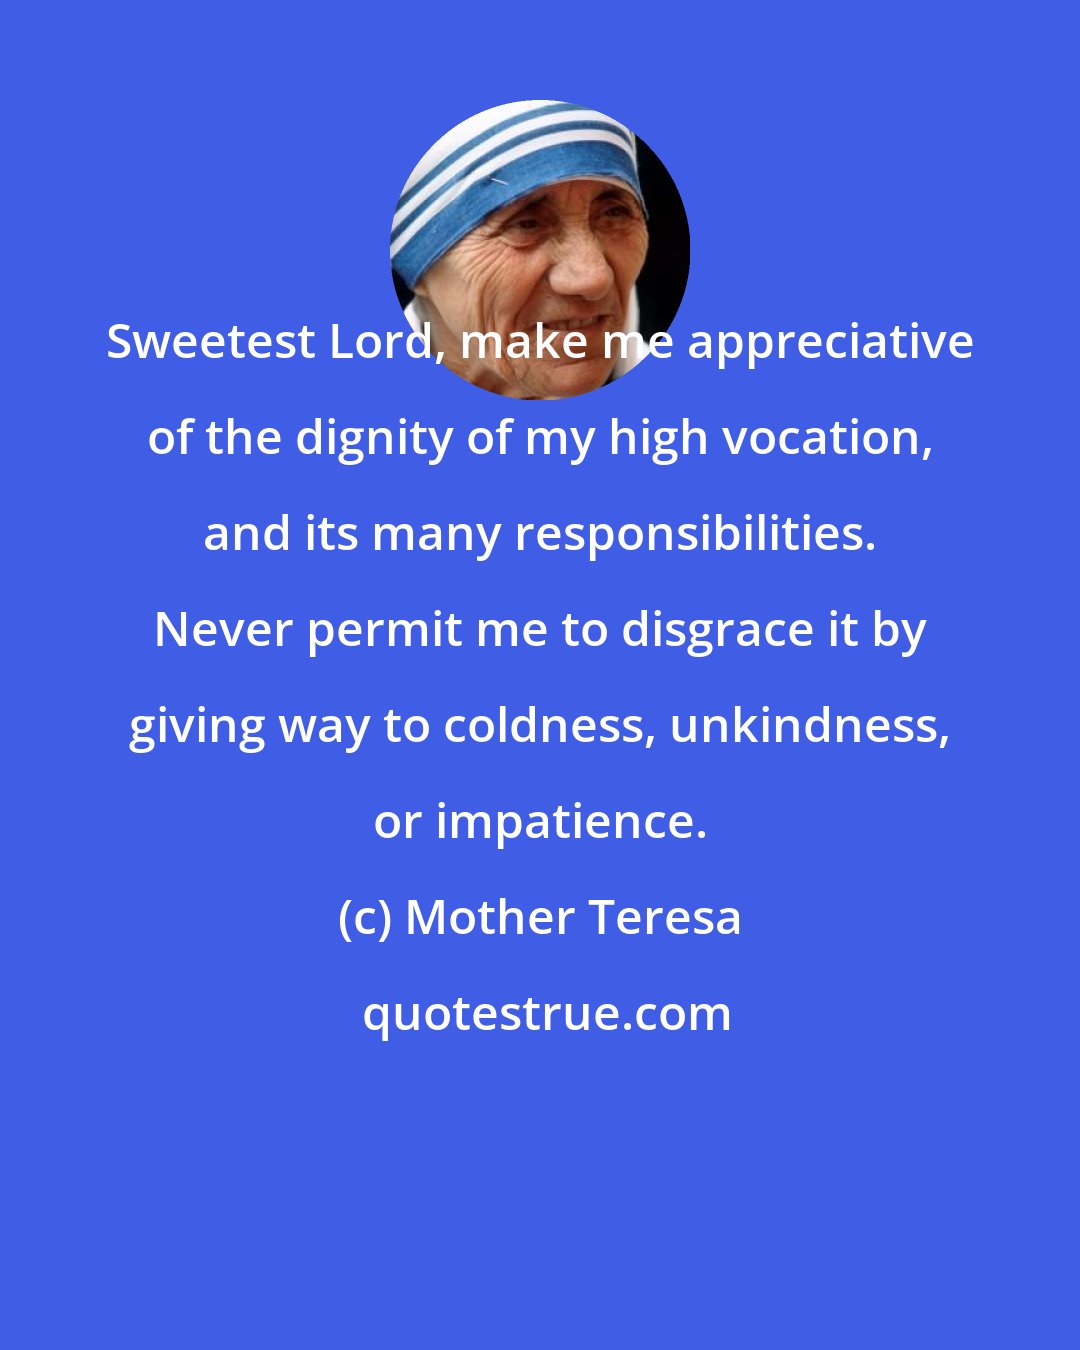 Mother Teresa: Sweetest Lord, make me appreciative of the dignity of my high vocation, and its many responsibilities. Never permit me to disgrace it by giving way to coldness, unkindness, or impatience.